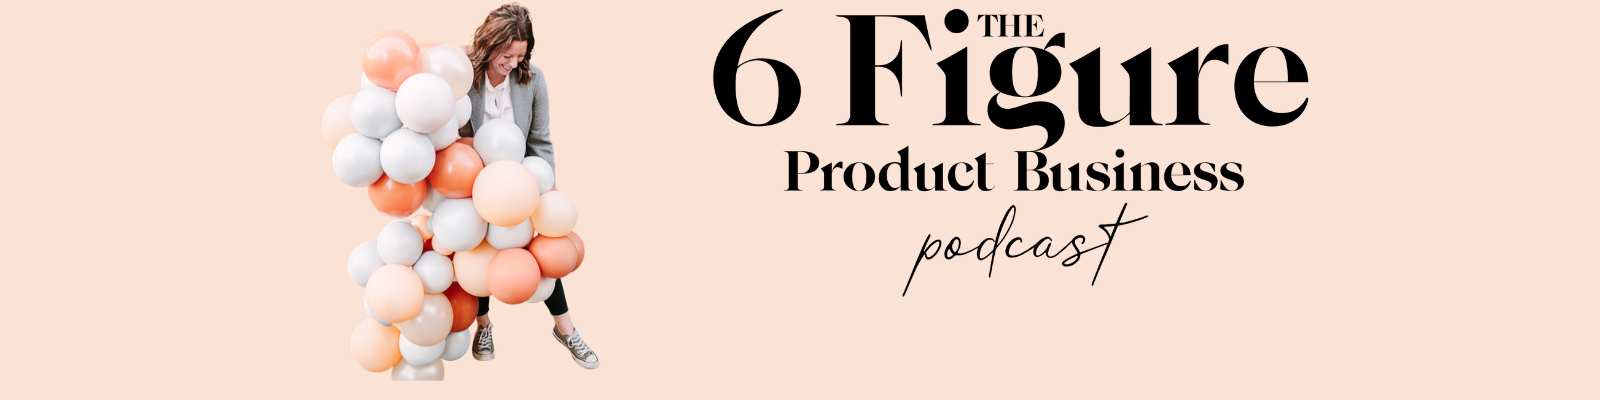 The 6 Figure Product Business Podcast